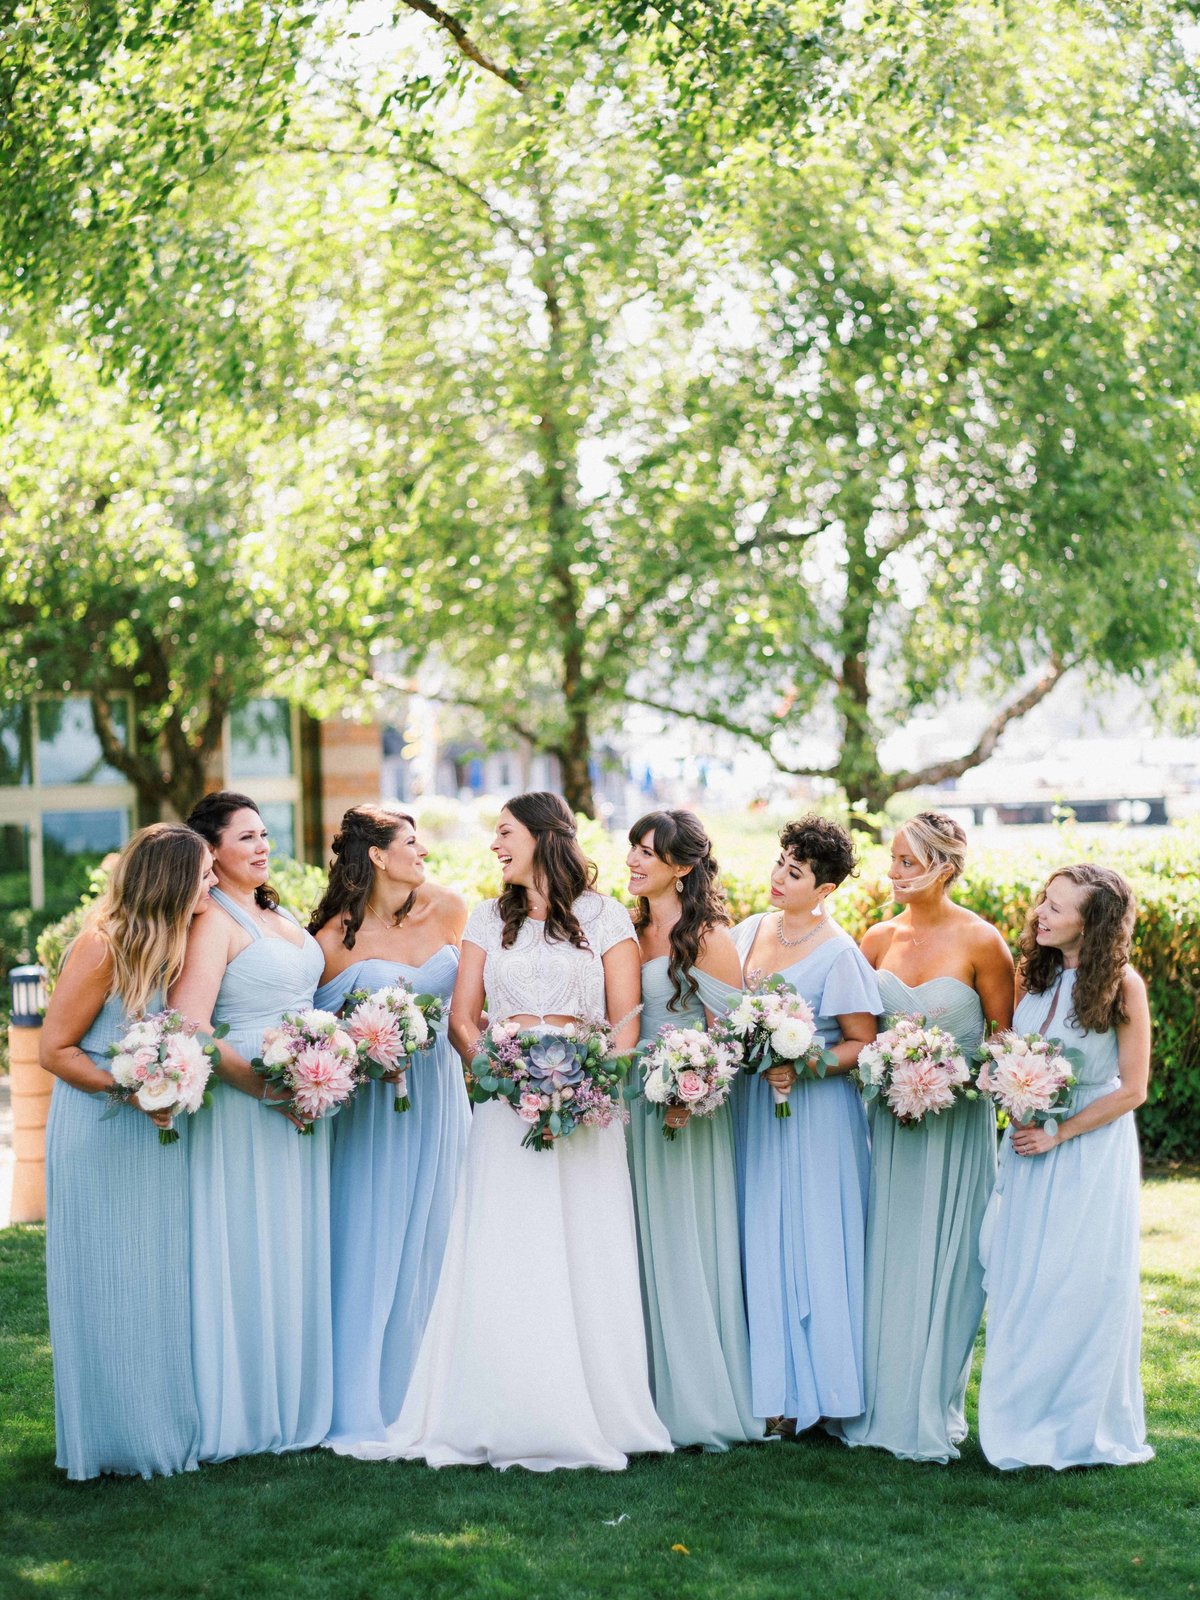 Our Beautiful bride and her maids wearing light blue dresses and holding greenery bouquets, smiling in the sunshine